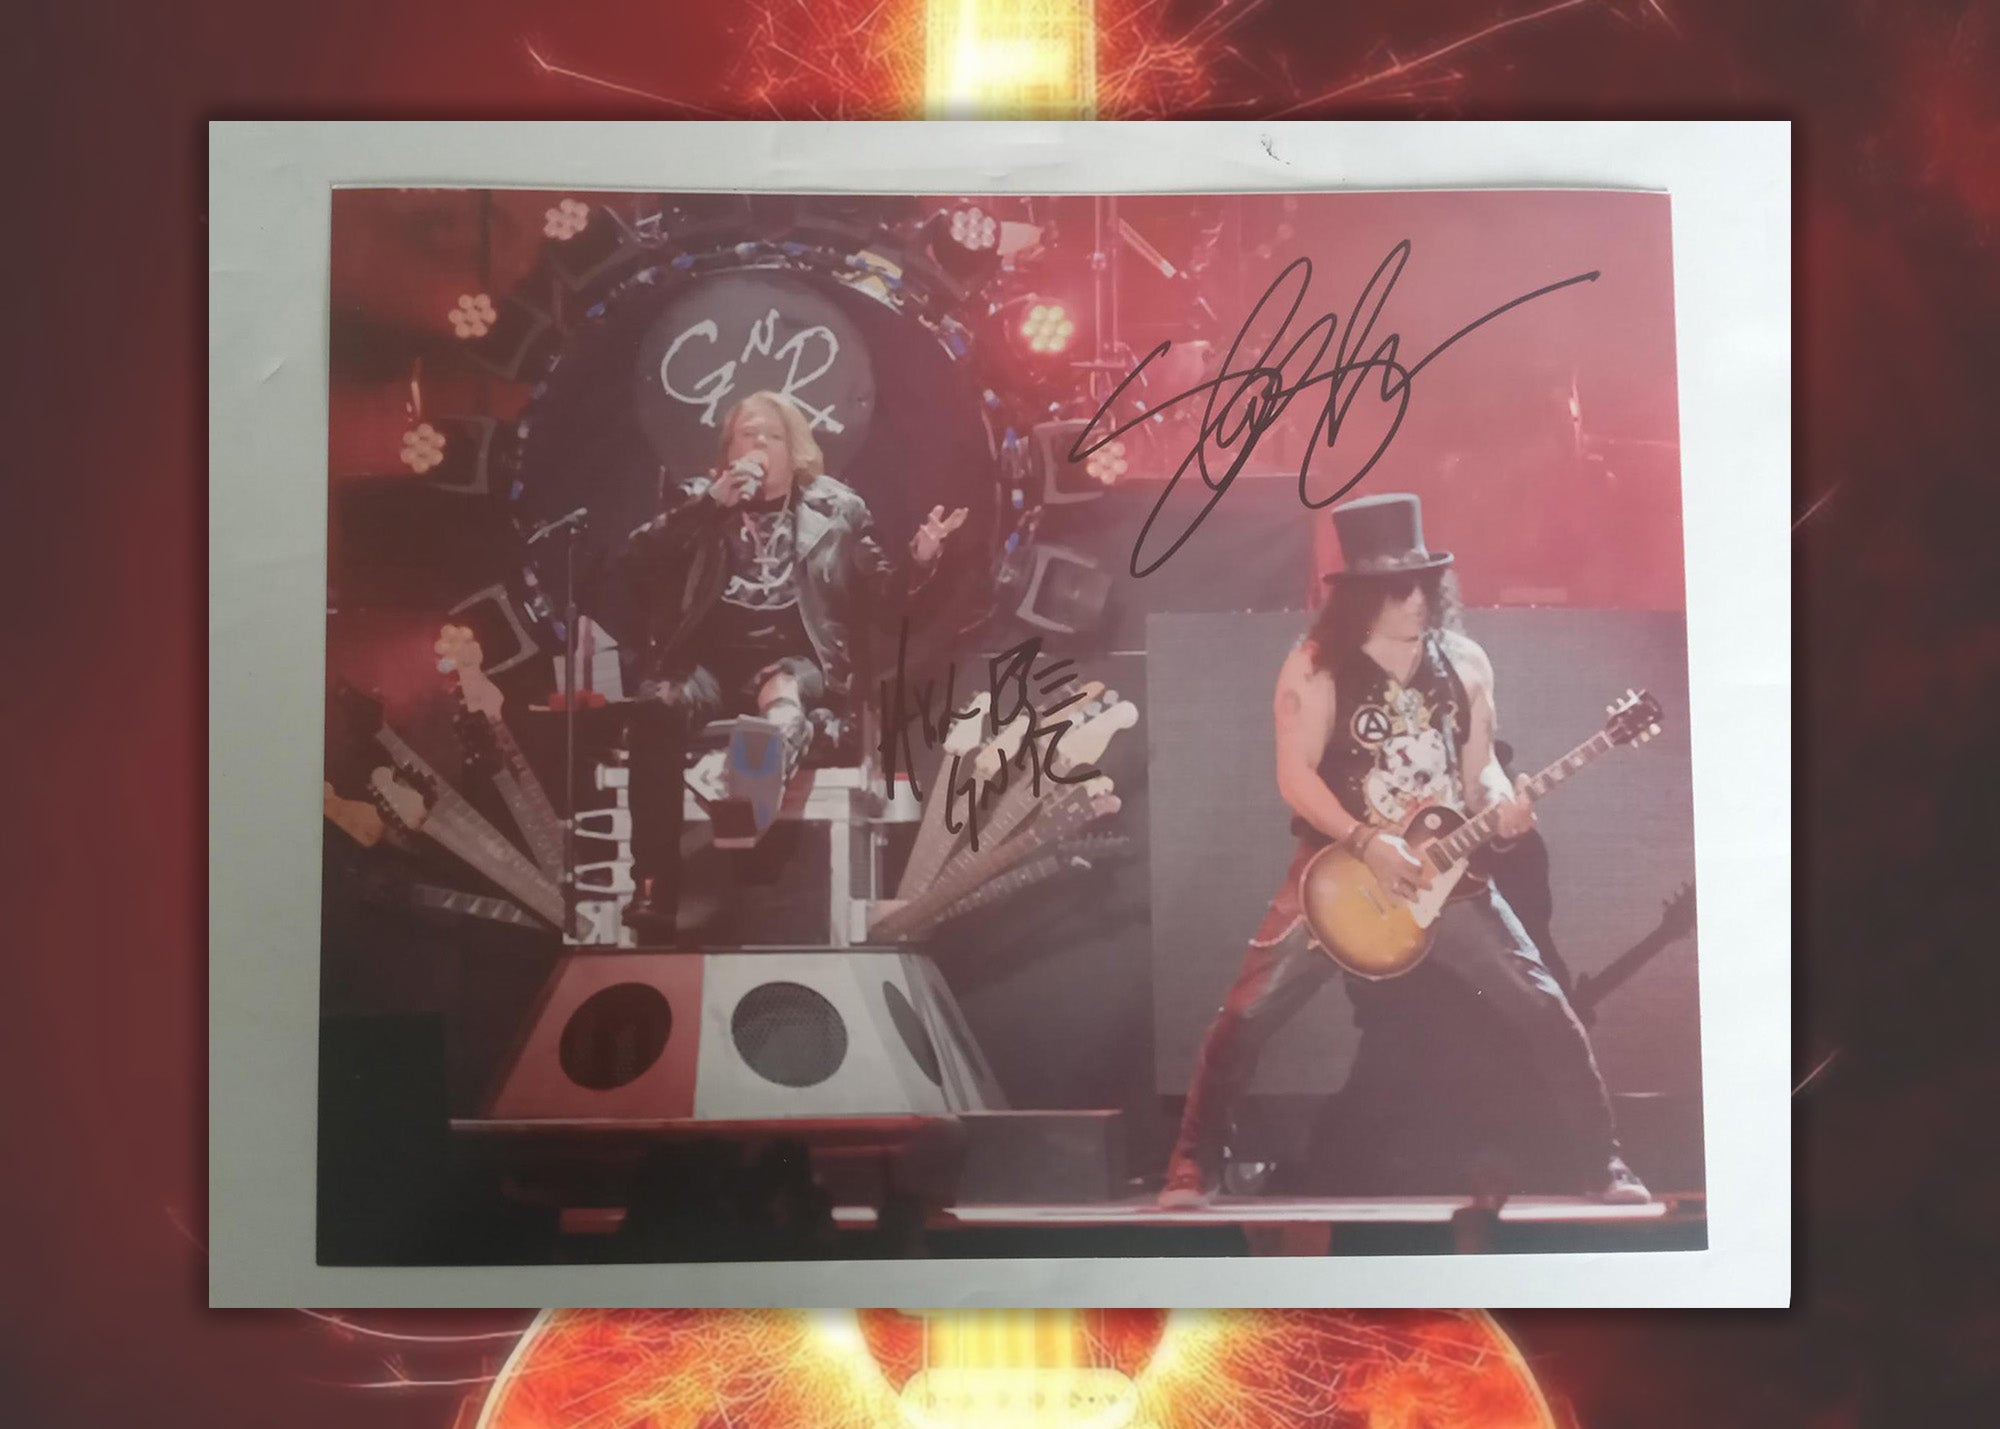 W. Axl Rose and Saul Hudson 'Slash' Guns and Roses 8 x 10 photo signed with proof